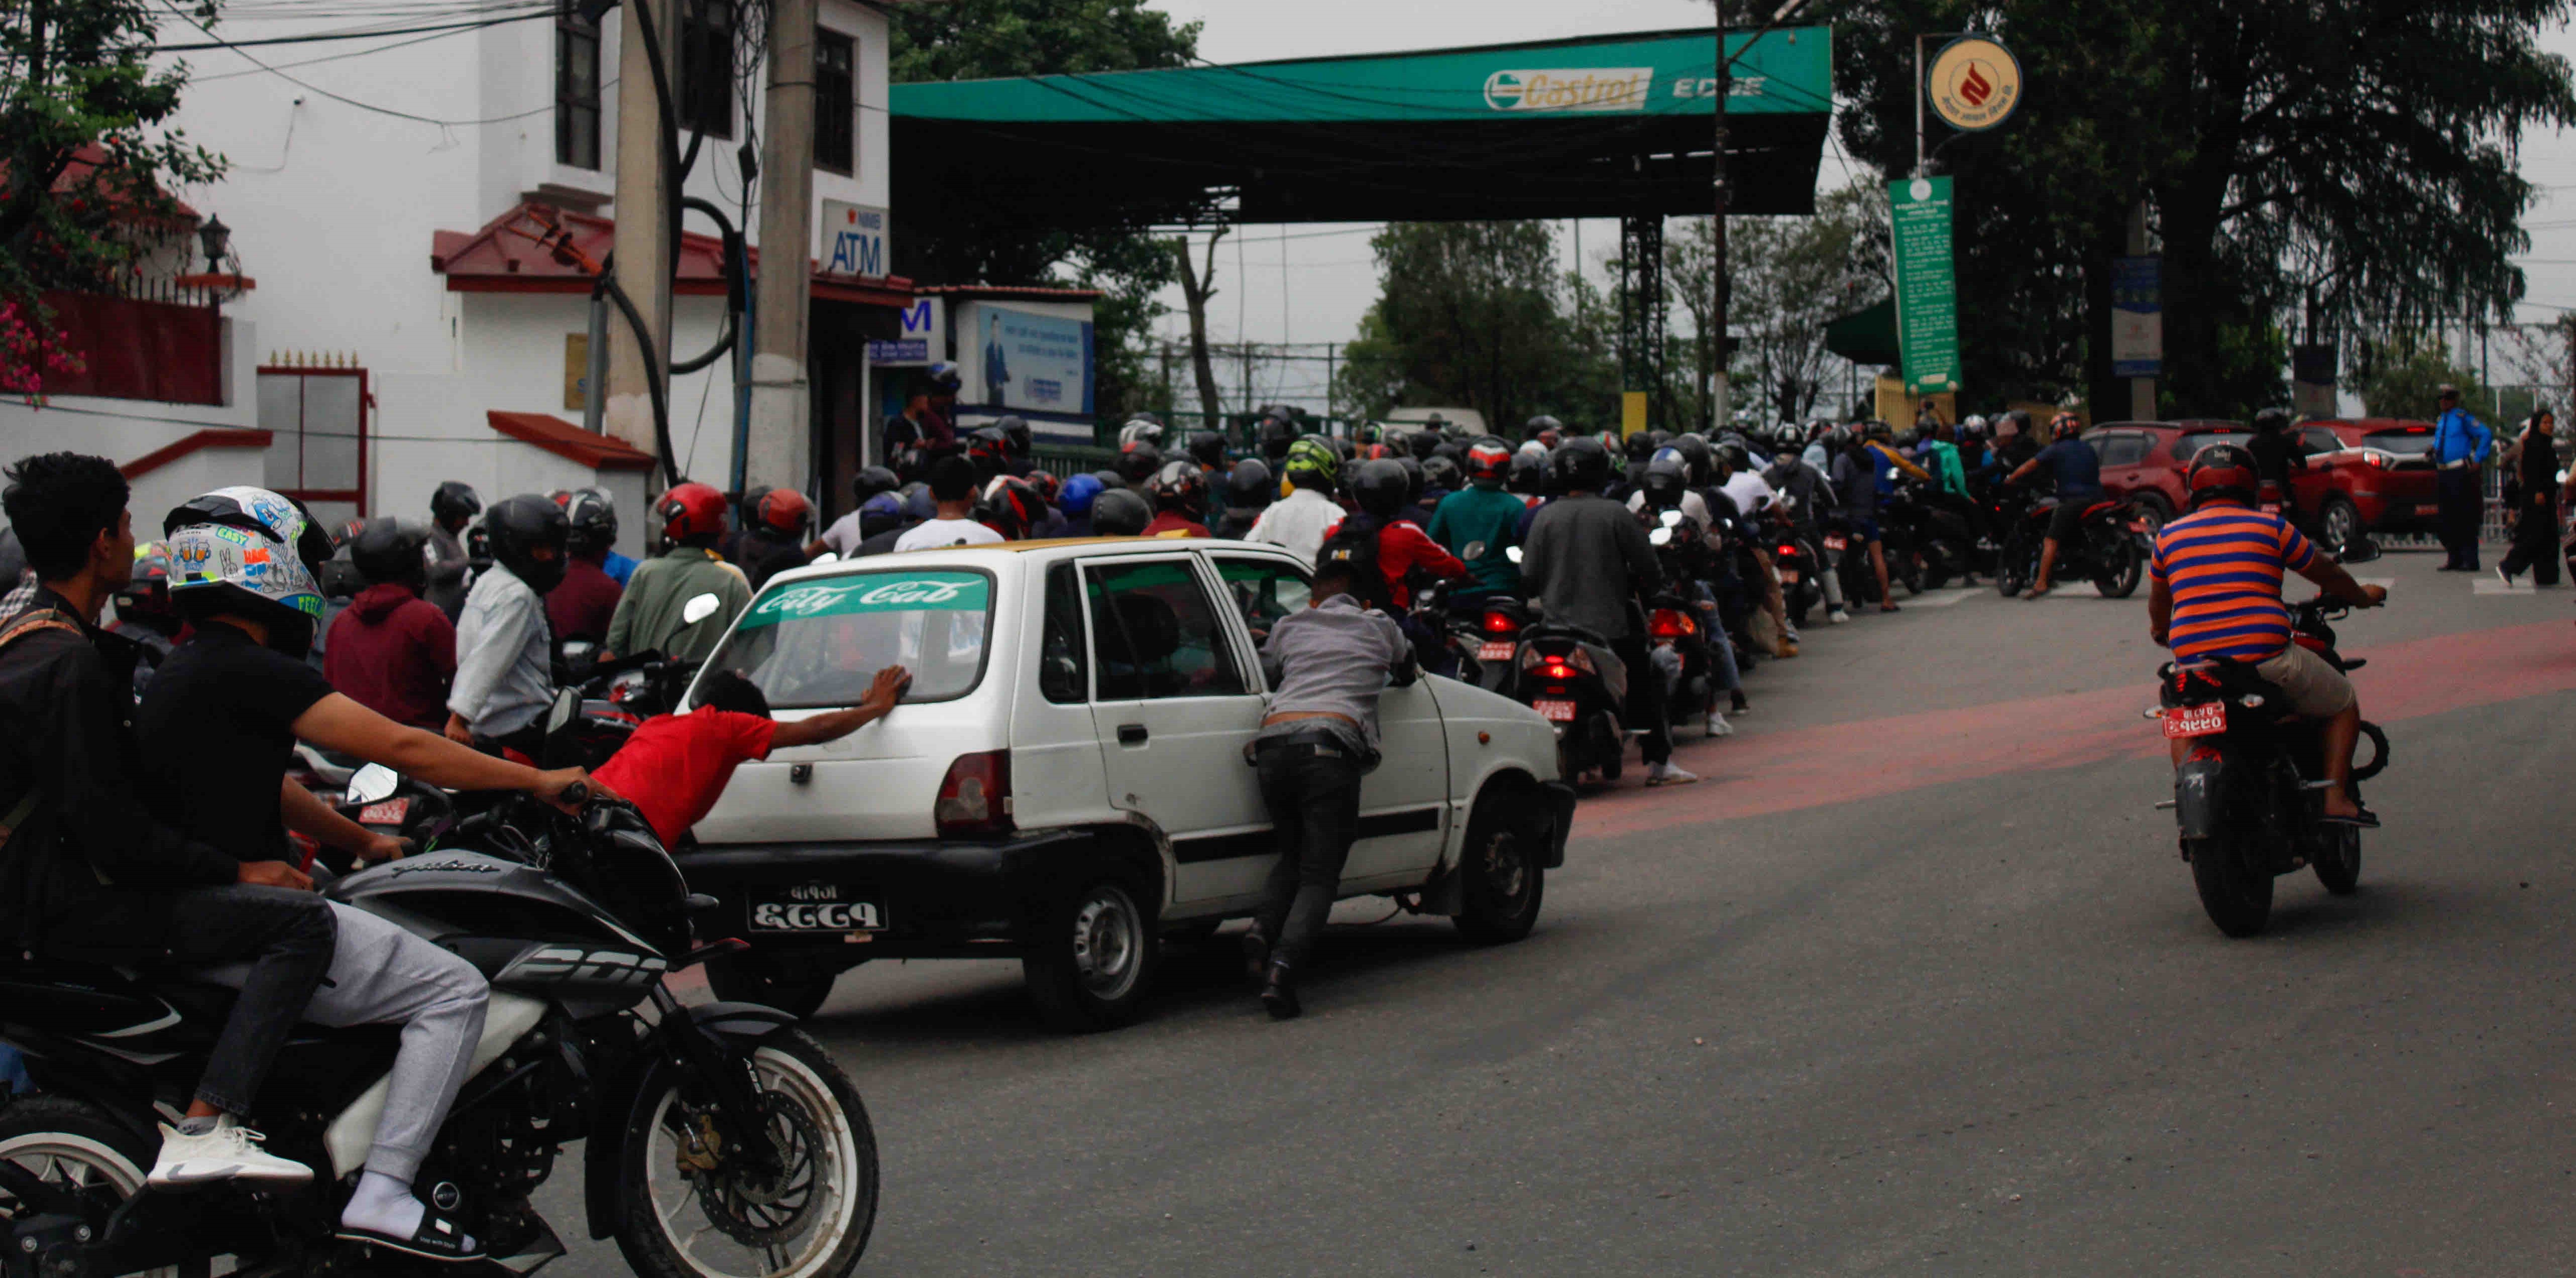 Supply of petroleum products affected in Kathmandu Valley as tanker drivers protest, long queues at govt-run petrol pumps (With Pictures)